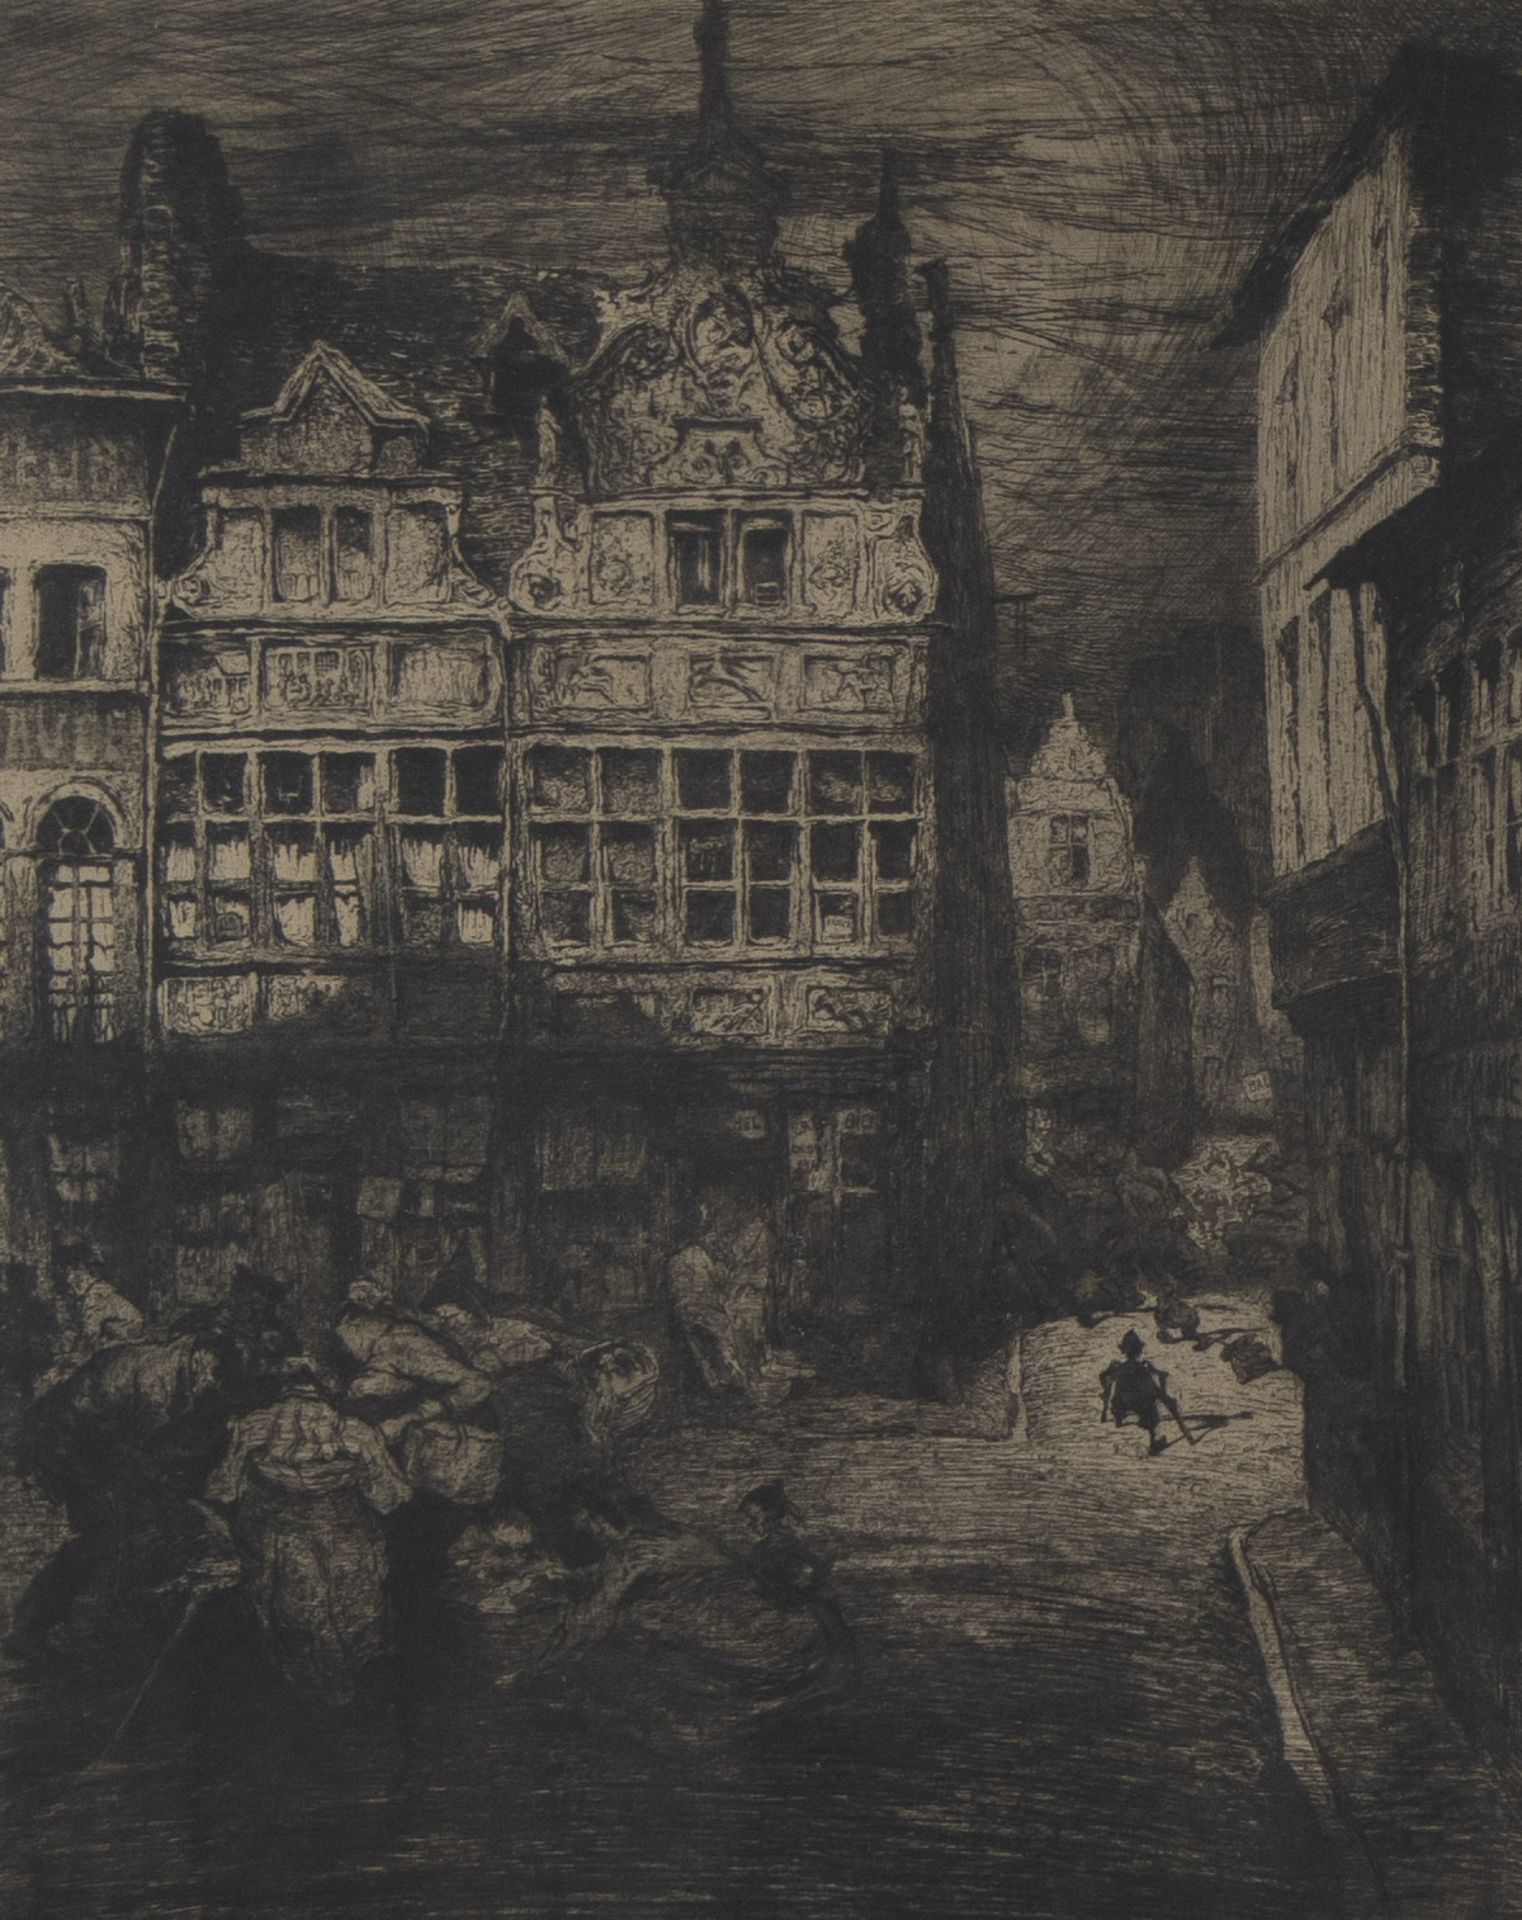 Jules DE BRUYCKER (1870-1945), etching Maison Palfijn Gand, numbered 66/150 and signed